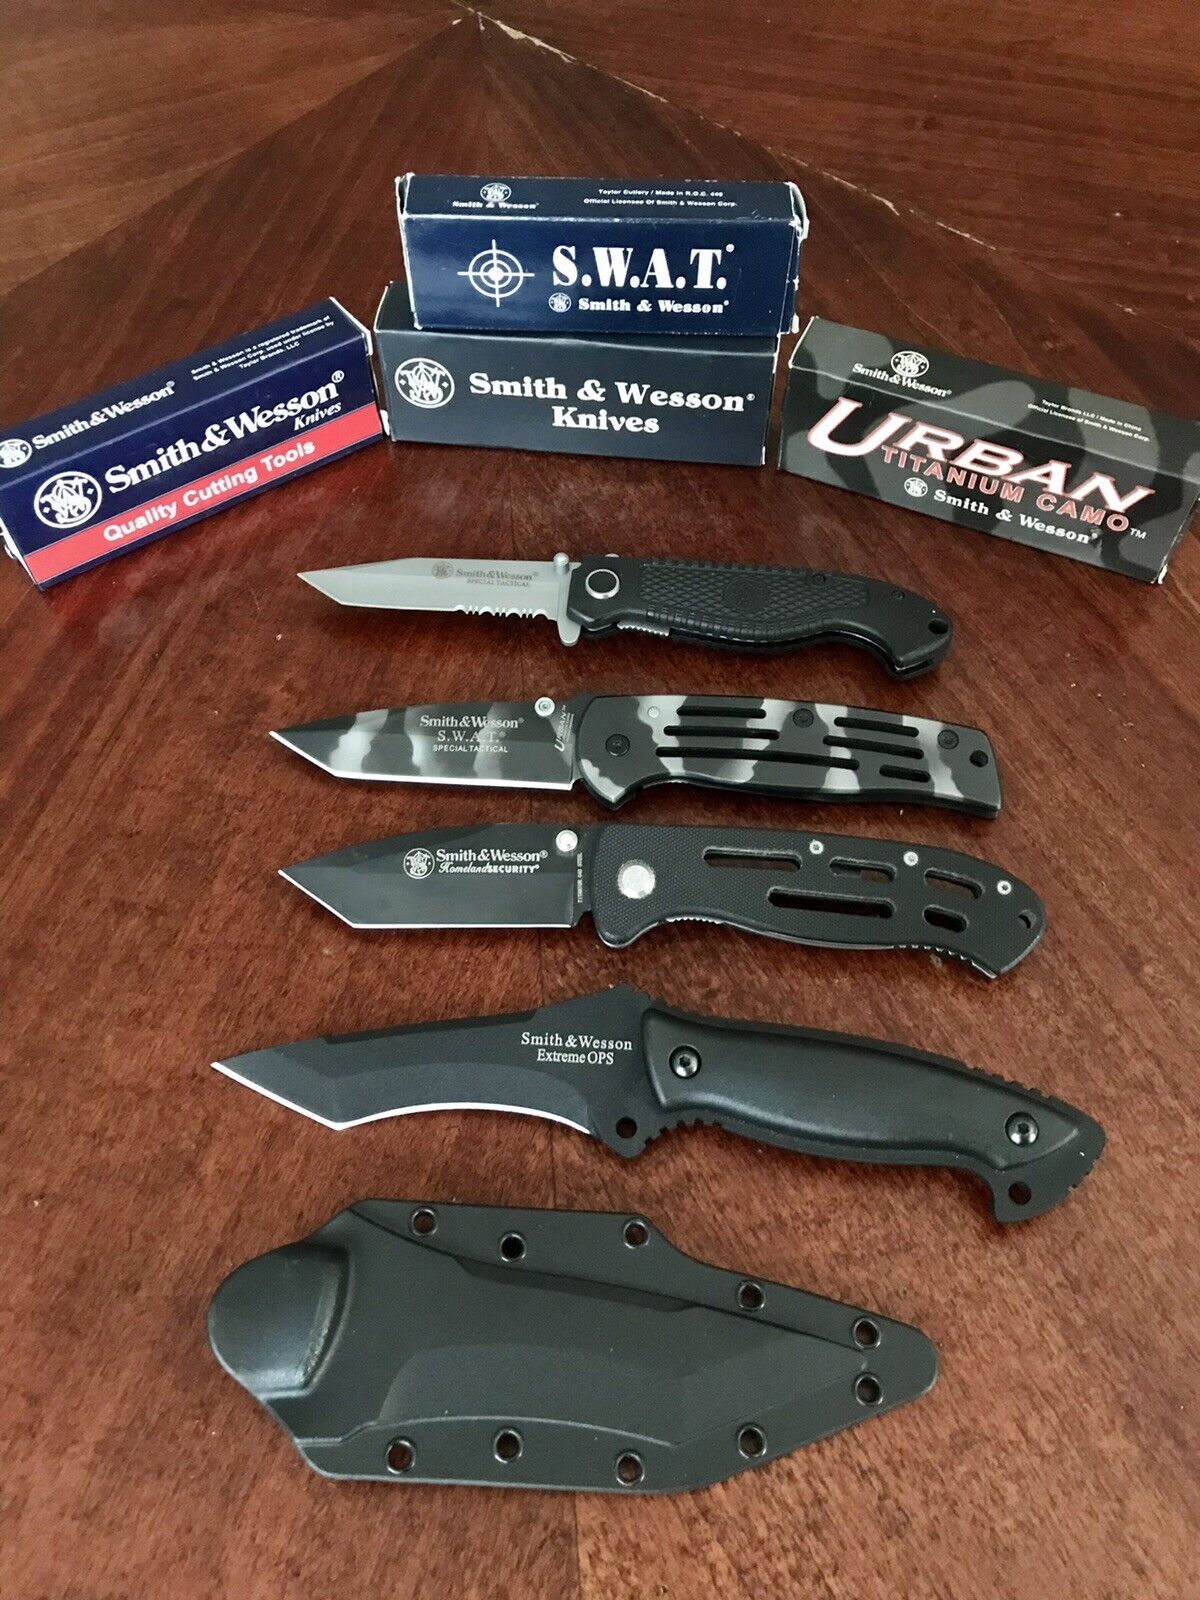 Lot of 4 New Smith & Wesson Knives - Rare Folders, Special Tactical, Extreme OPS